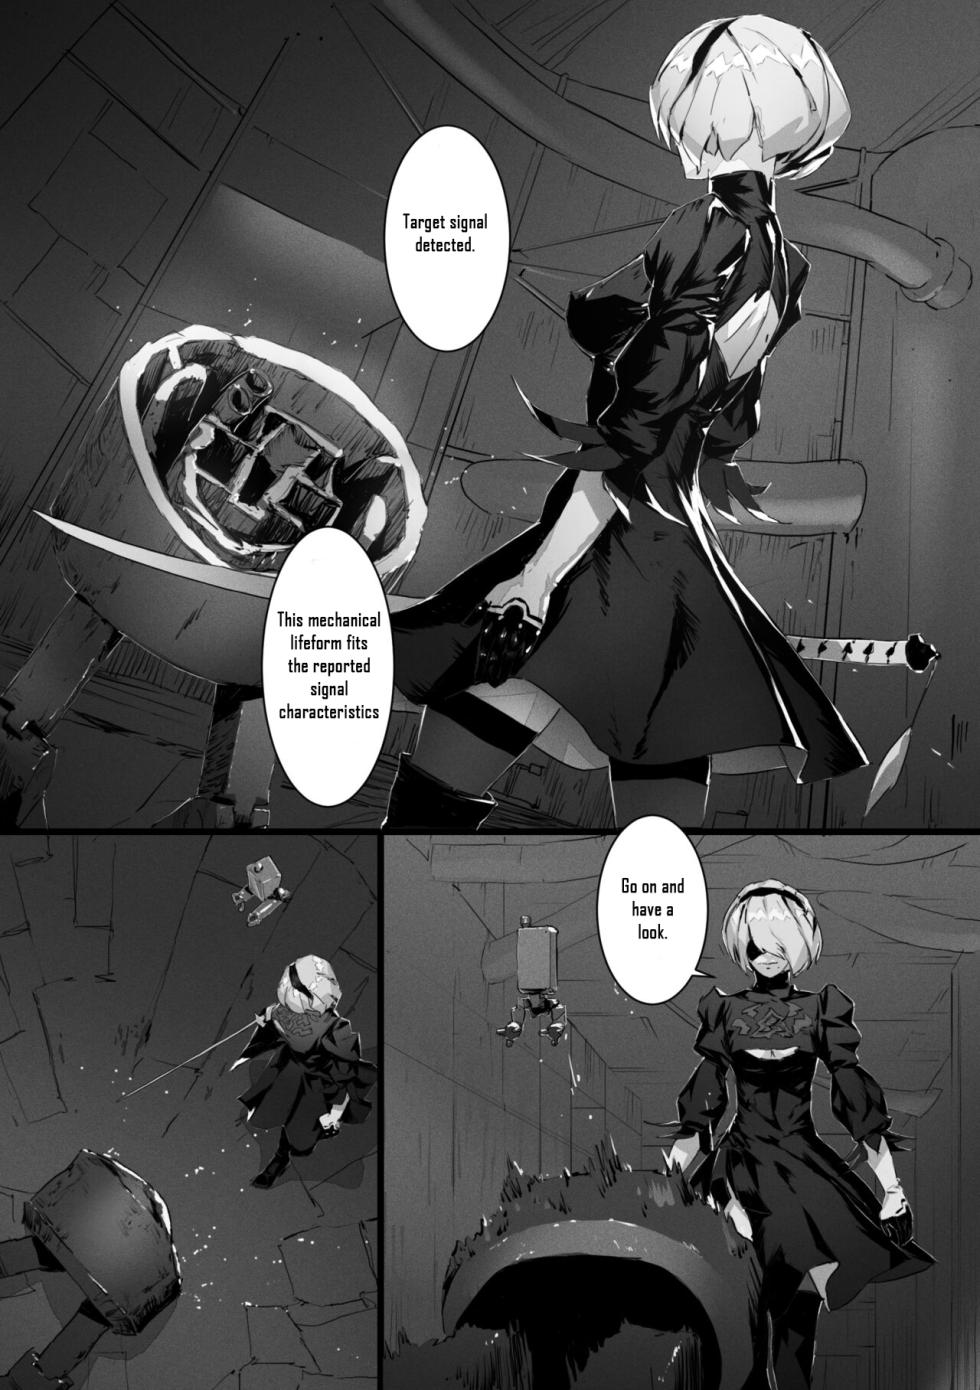 [Tyrant] 2B In Trouble Part 1-6 (NieR:Automata) - Page 5